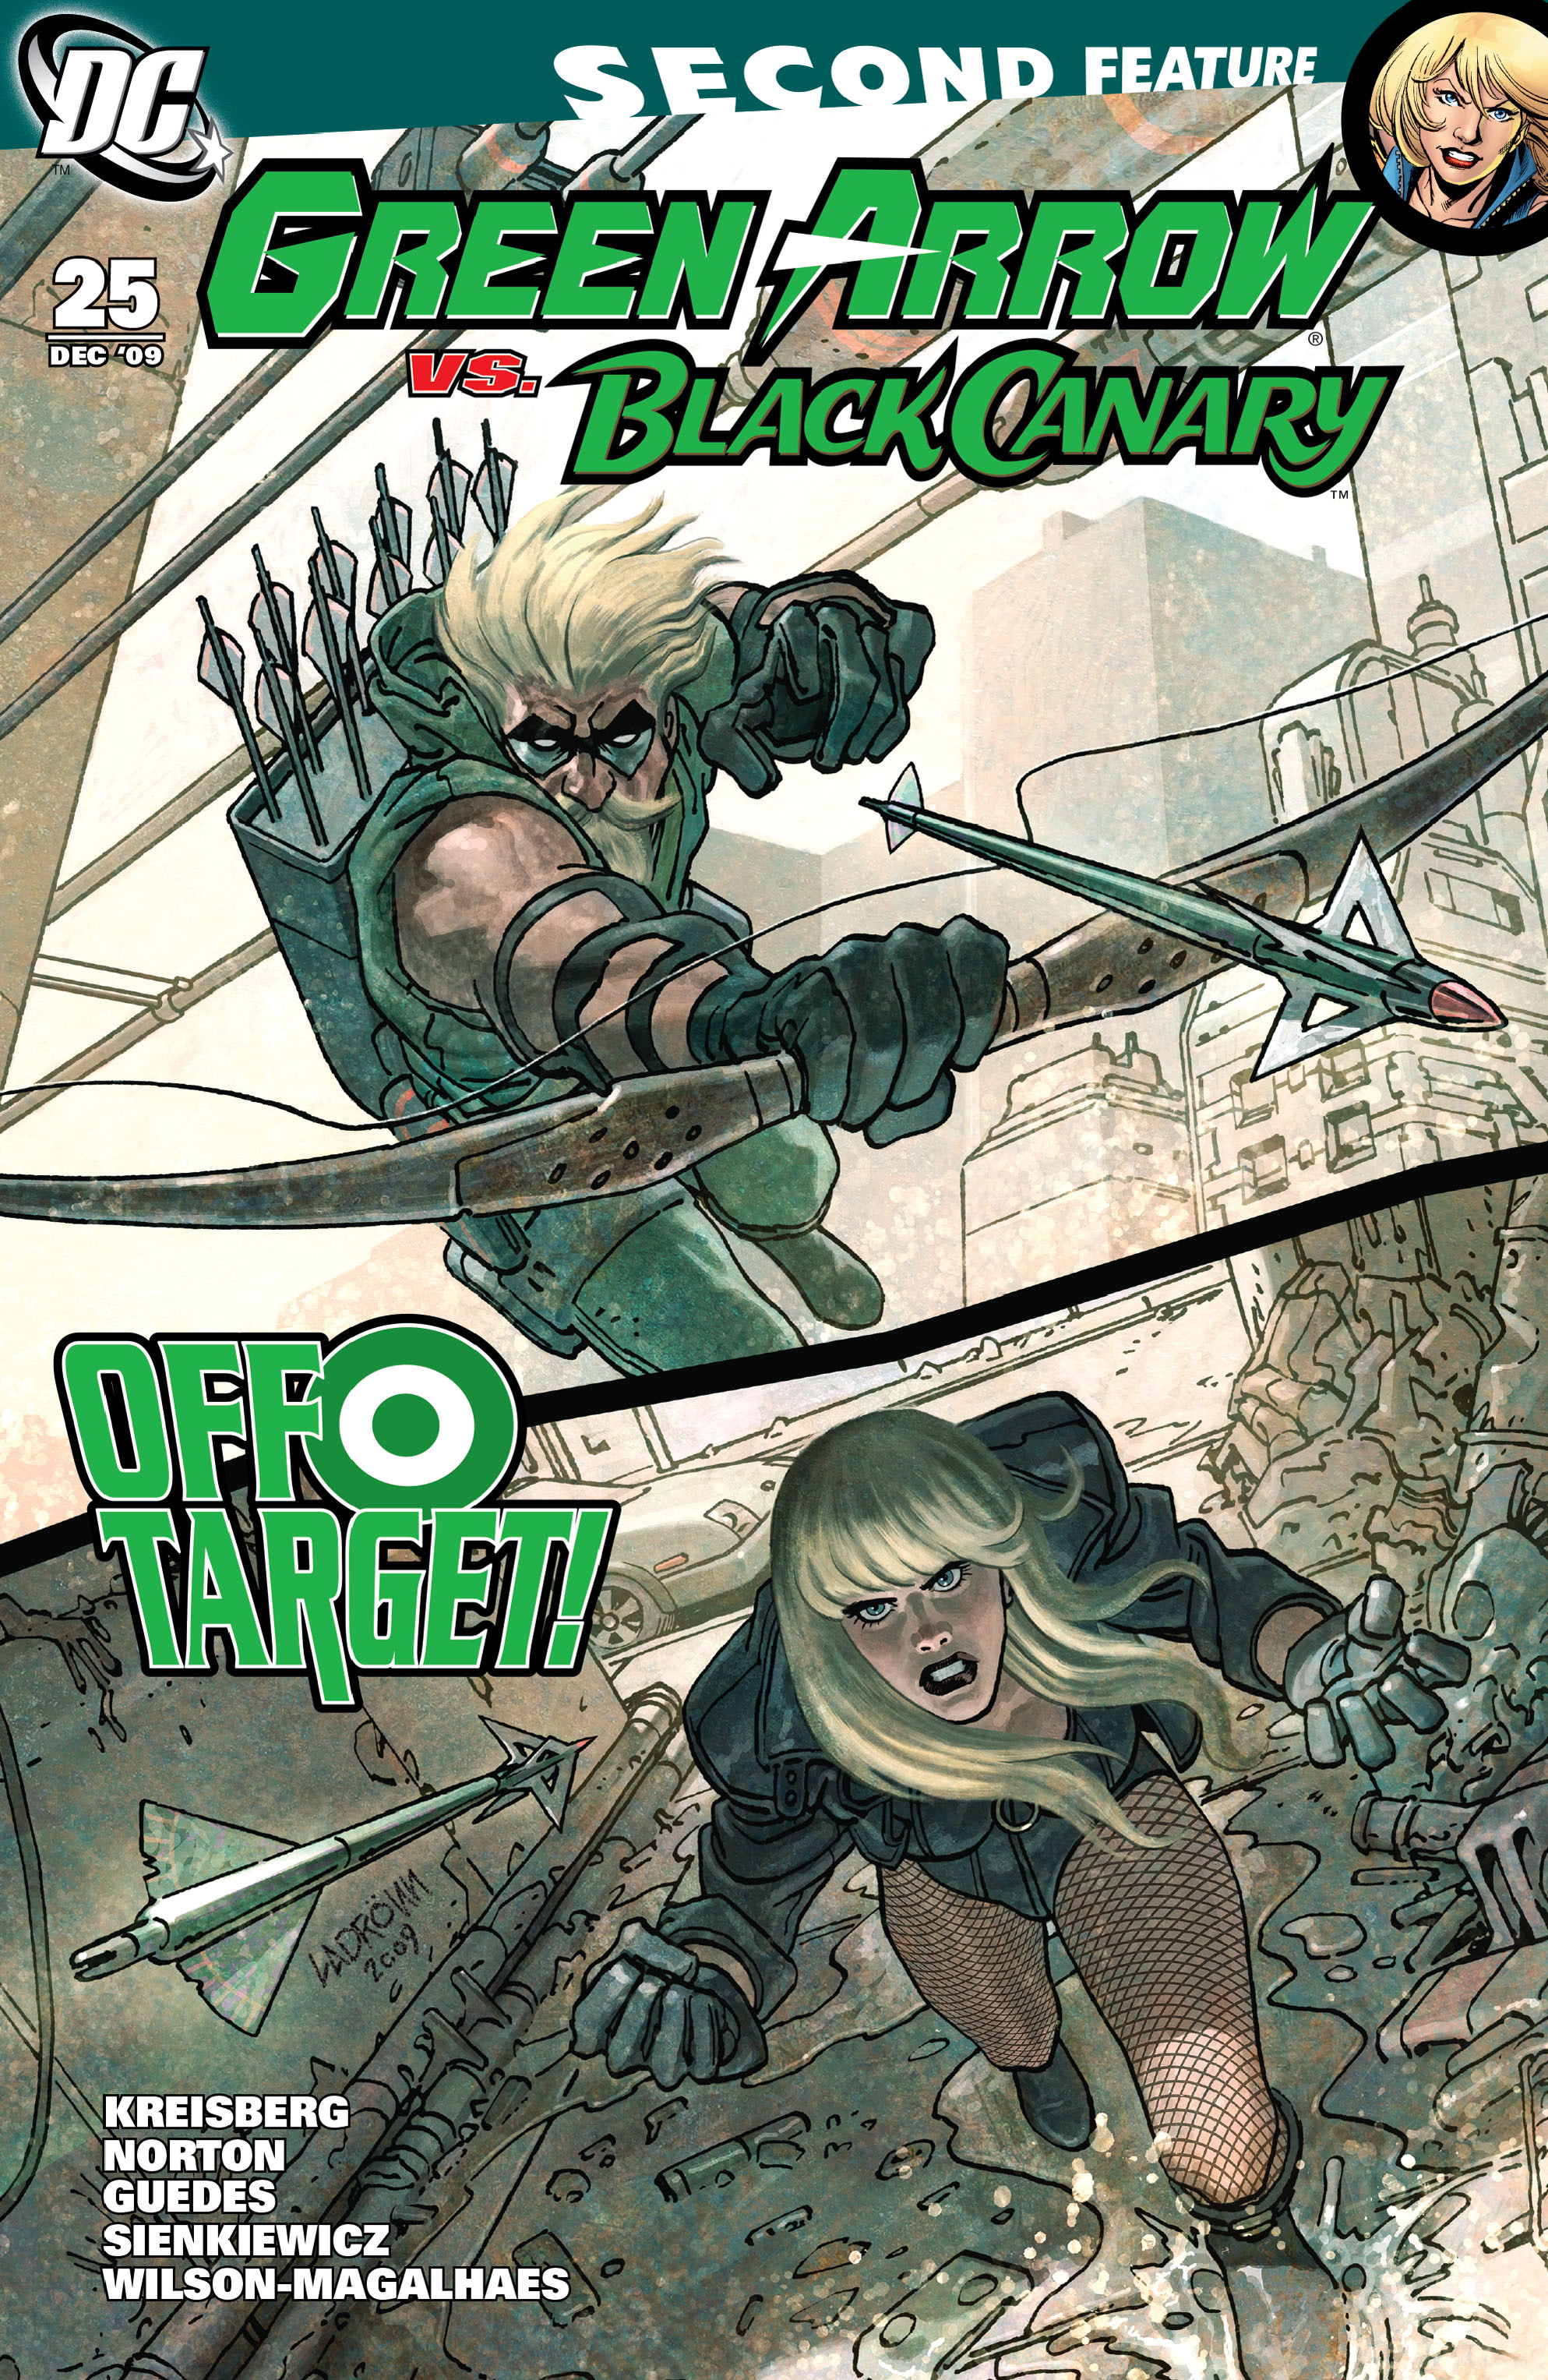 Read online Green Arrow/Black Canary comic -  Issue #25 - 1